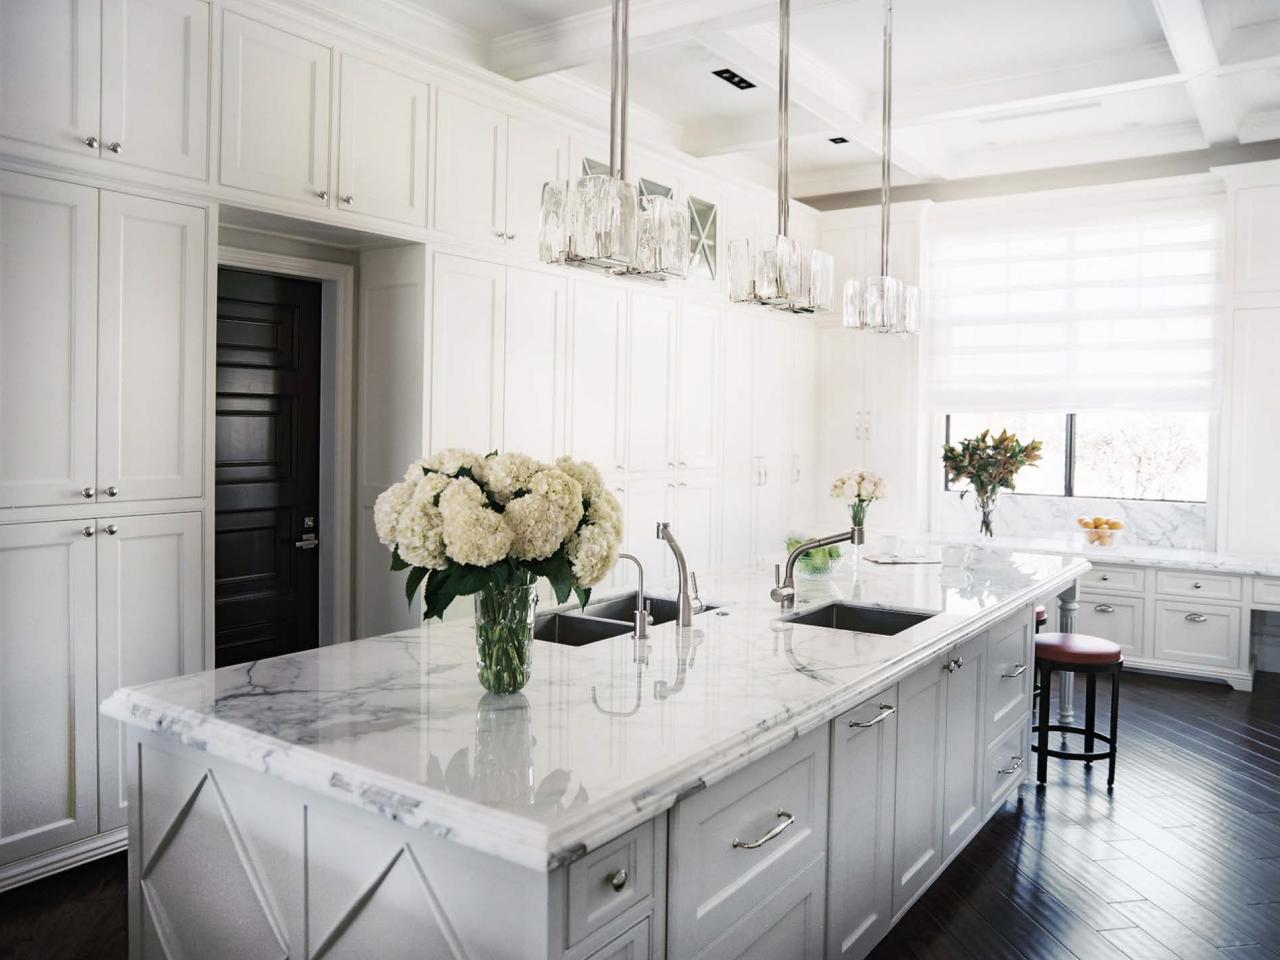  Kitchen  Remodels With White  Cabinets Pictures  Roy Home 